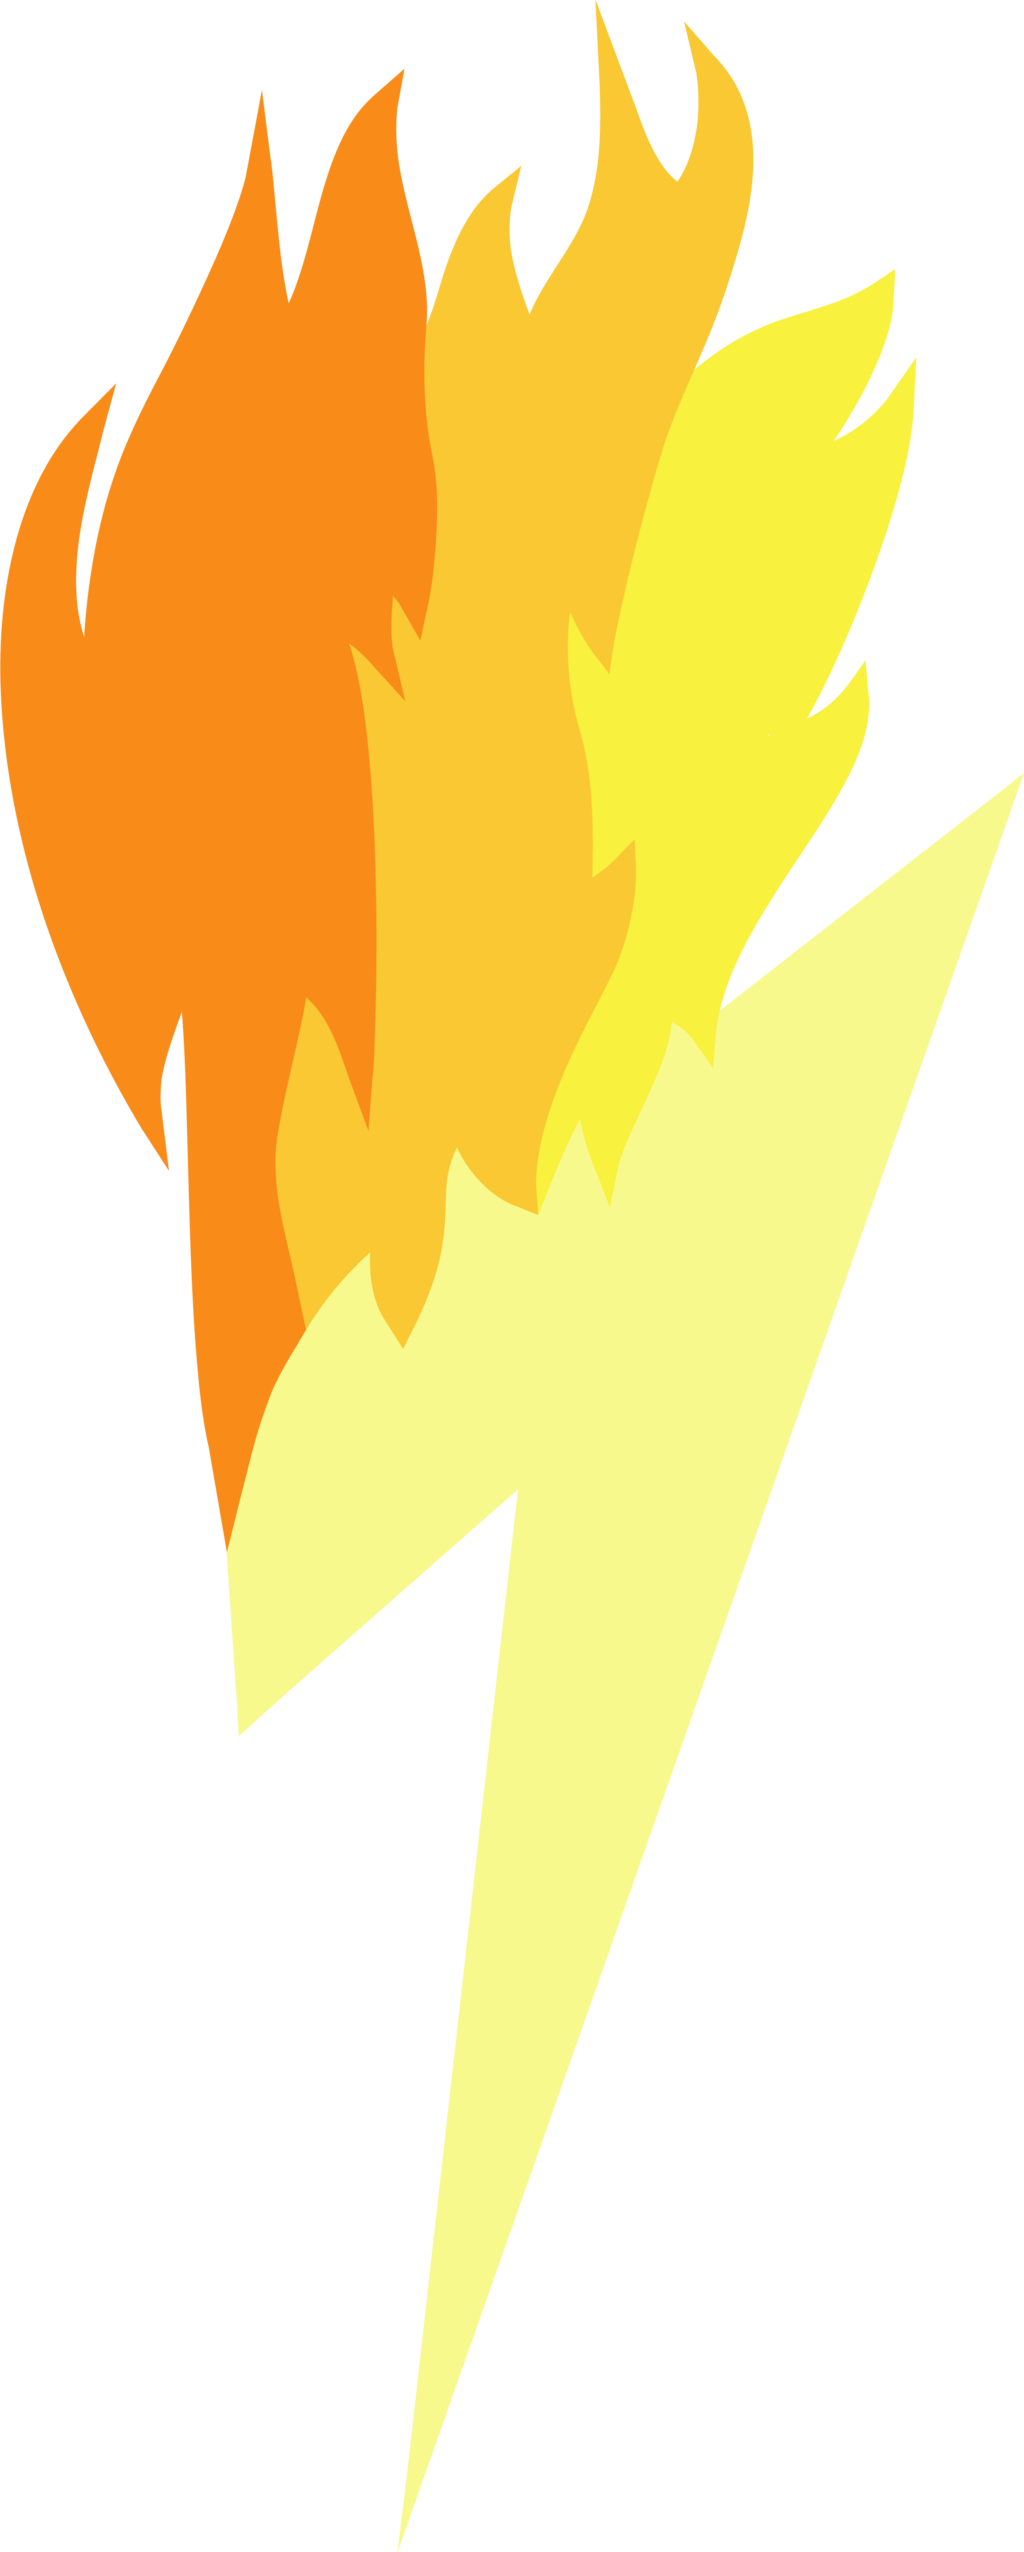 Fiery Thunderbolt Graphic PNG